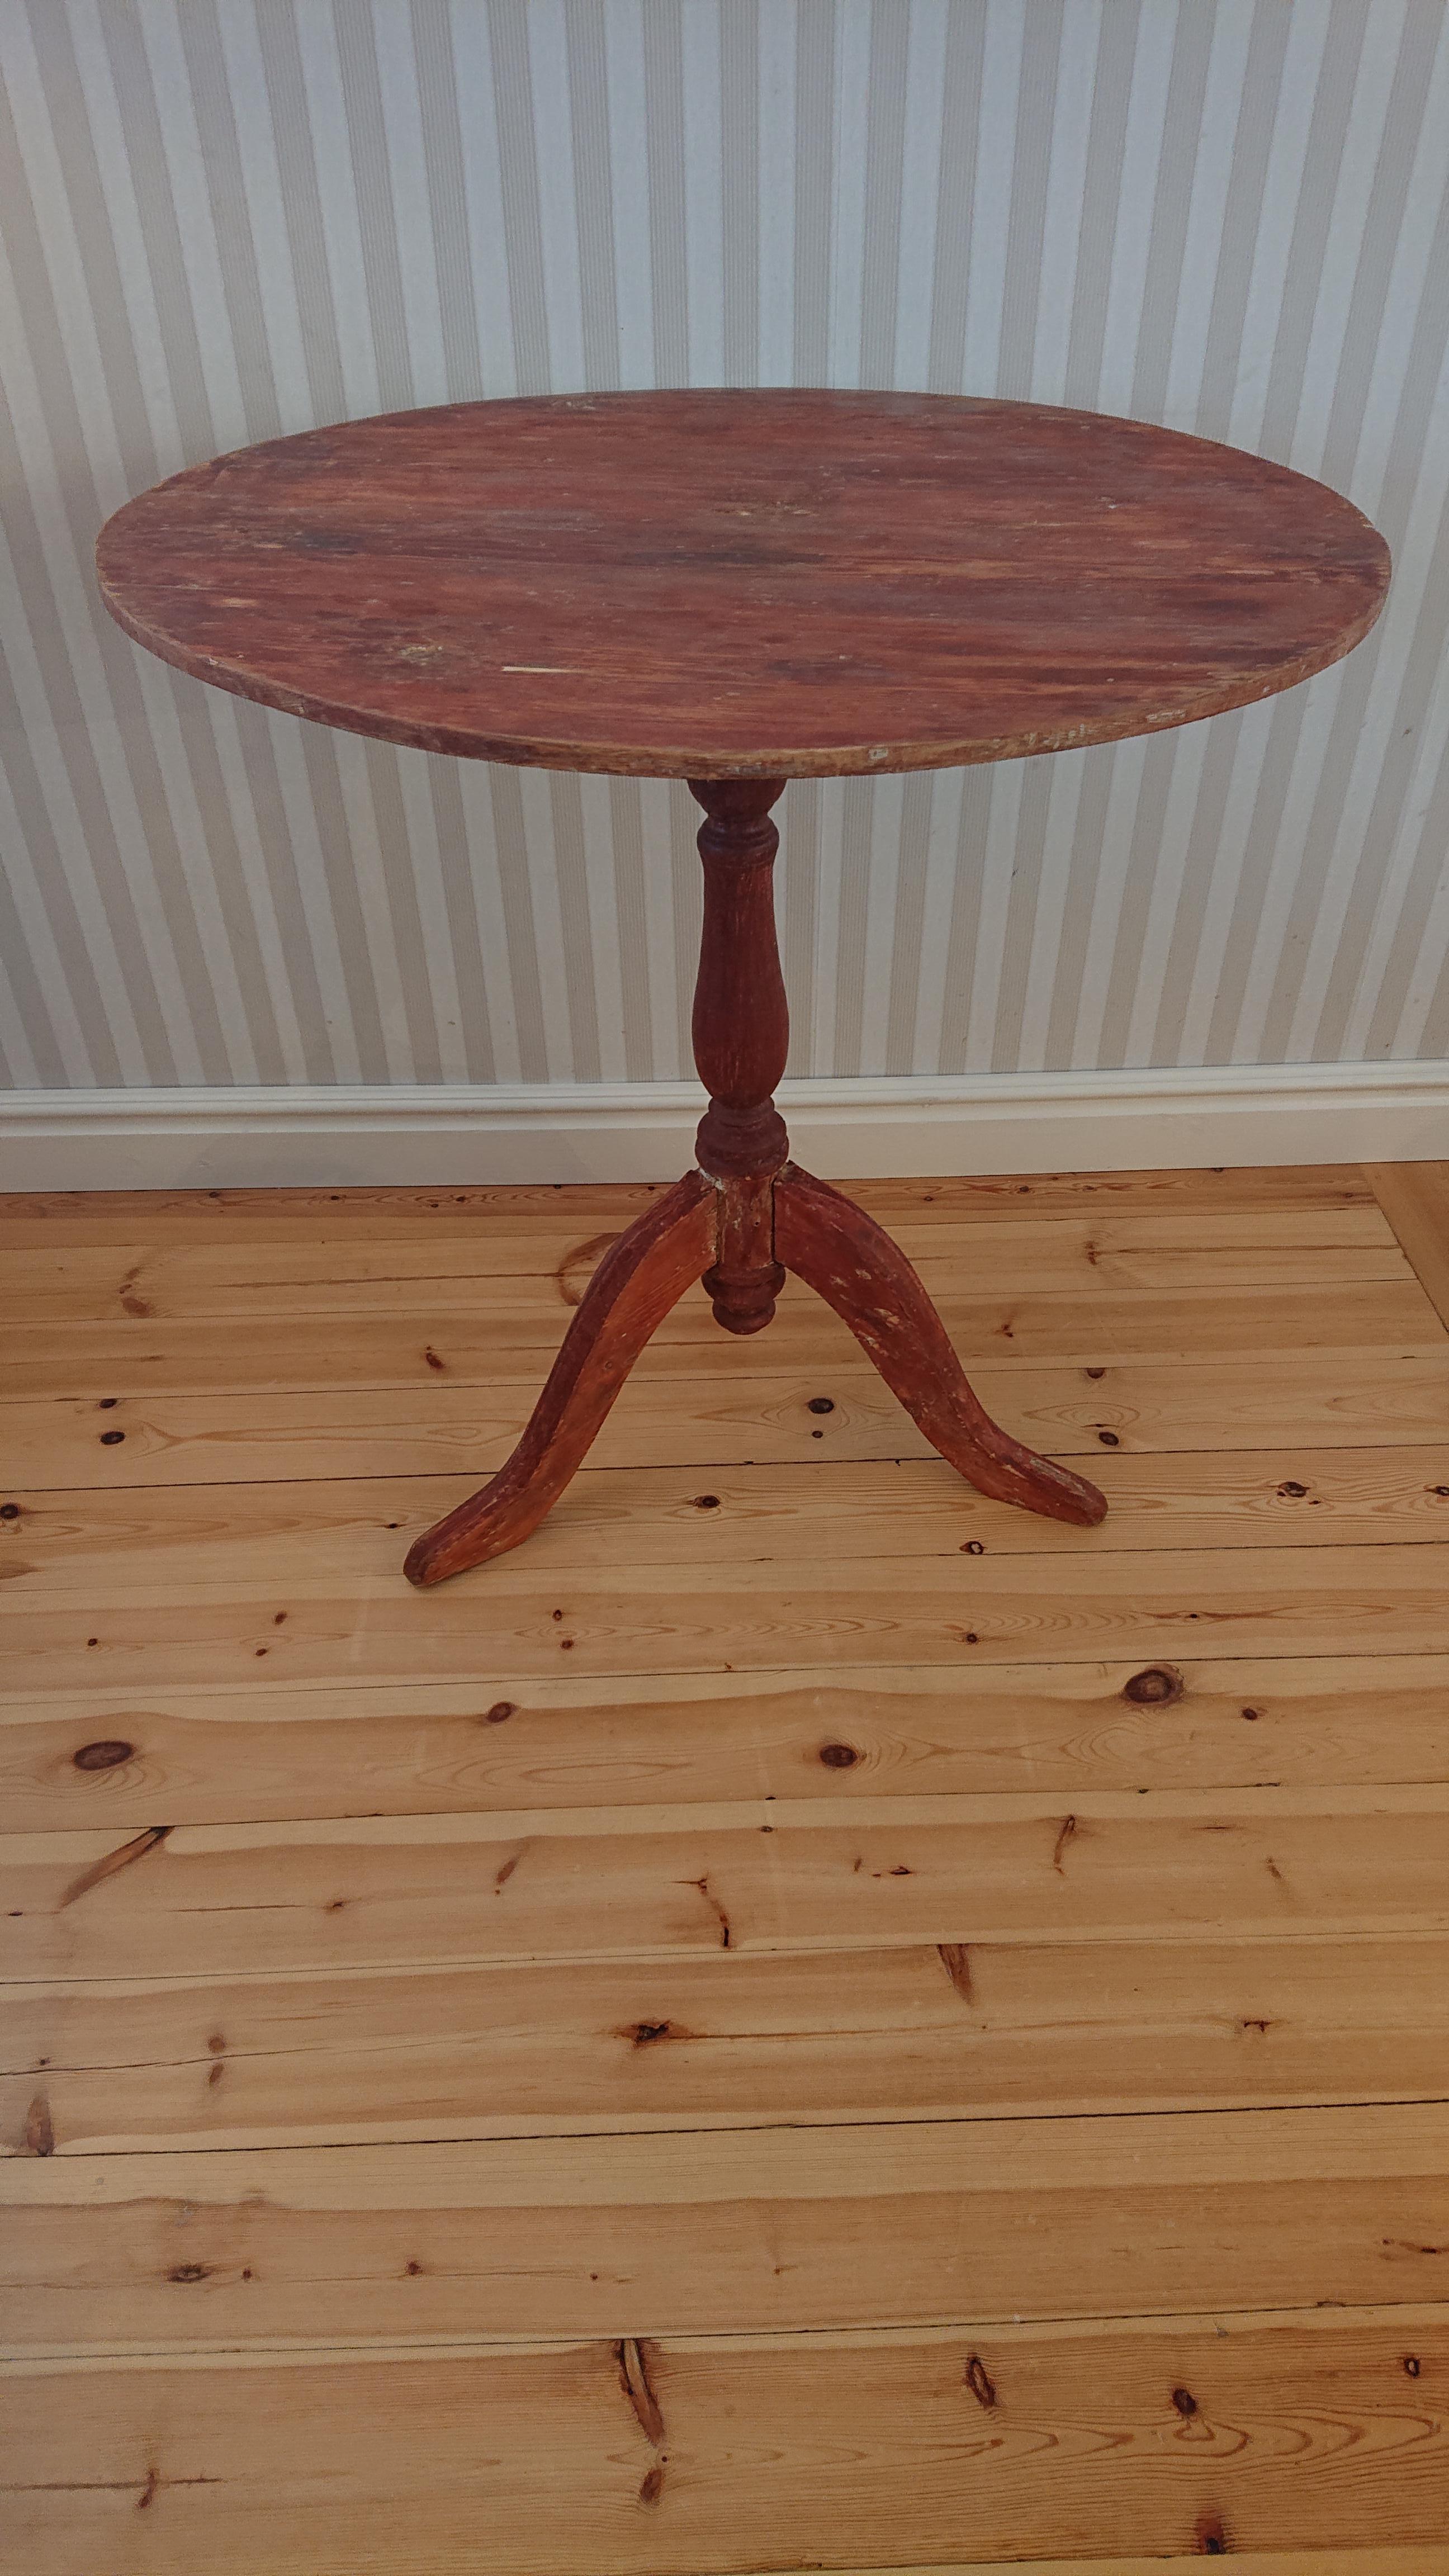 19th century Swedish tilt top table / dessert table from Skellefteå Västerbotten, Northern Sweden.
Scraped by hand to its original paint.
Turned base supported by beautifully carved legs.
 Nice proportions & stable in construction.
Good antique